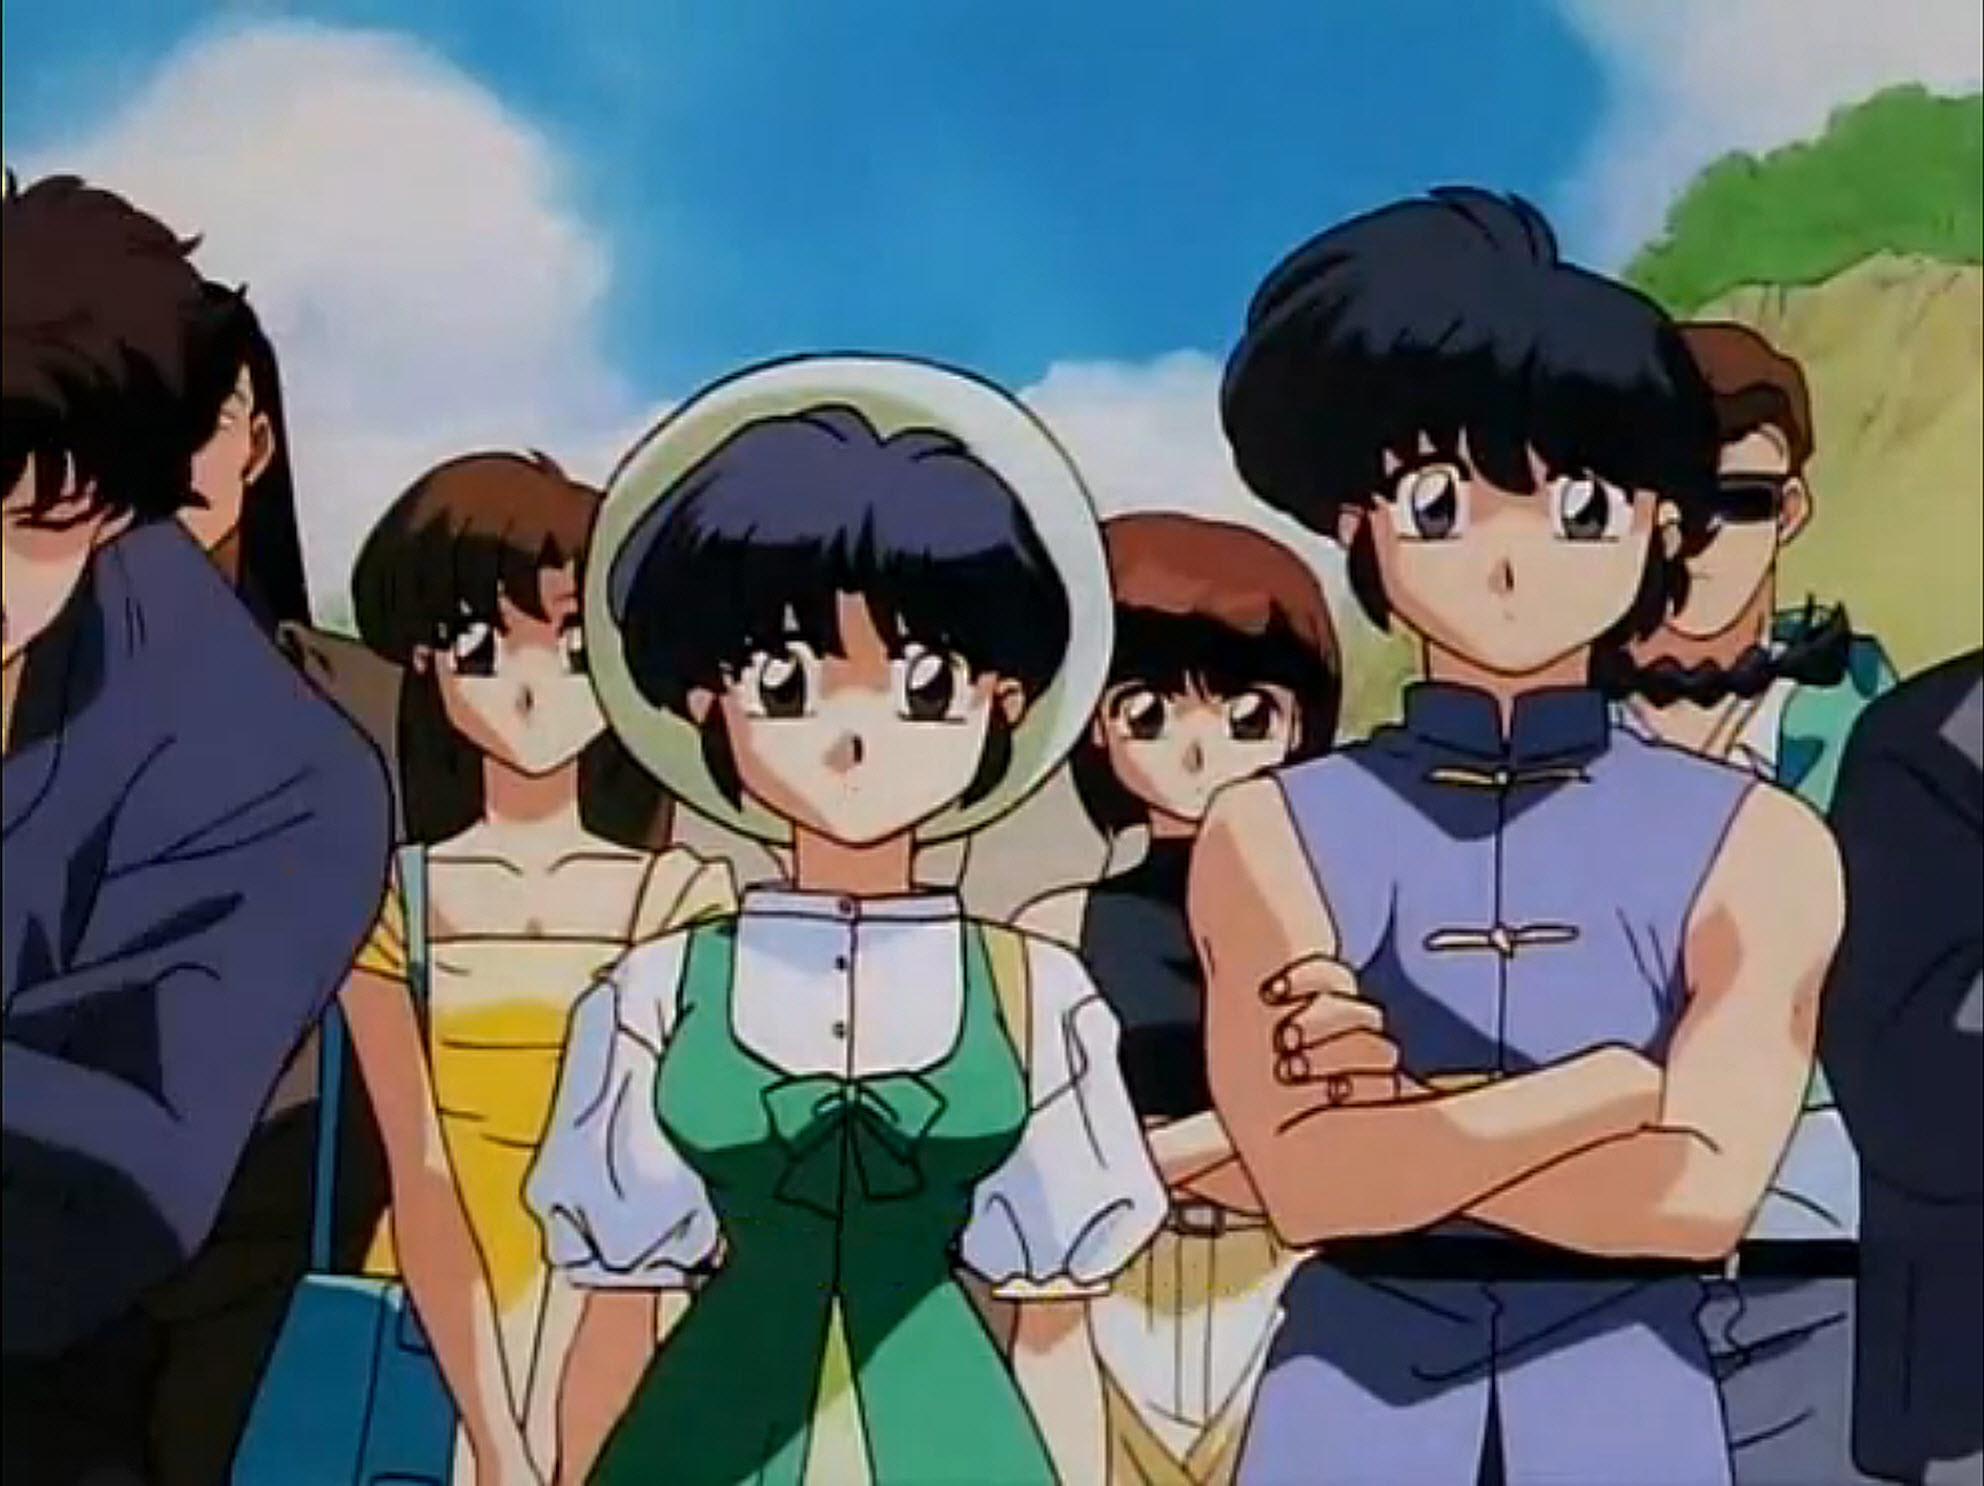 1984x1486 85 images about Ranma 1/2 on We Heart It | See more about ranma, anime and  akane